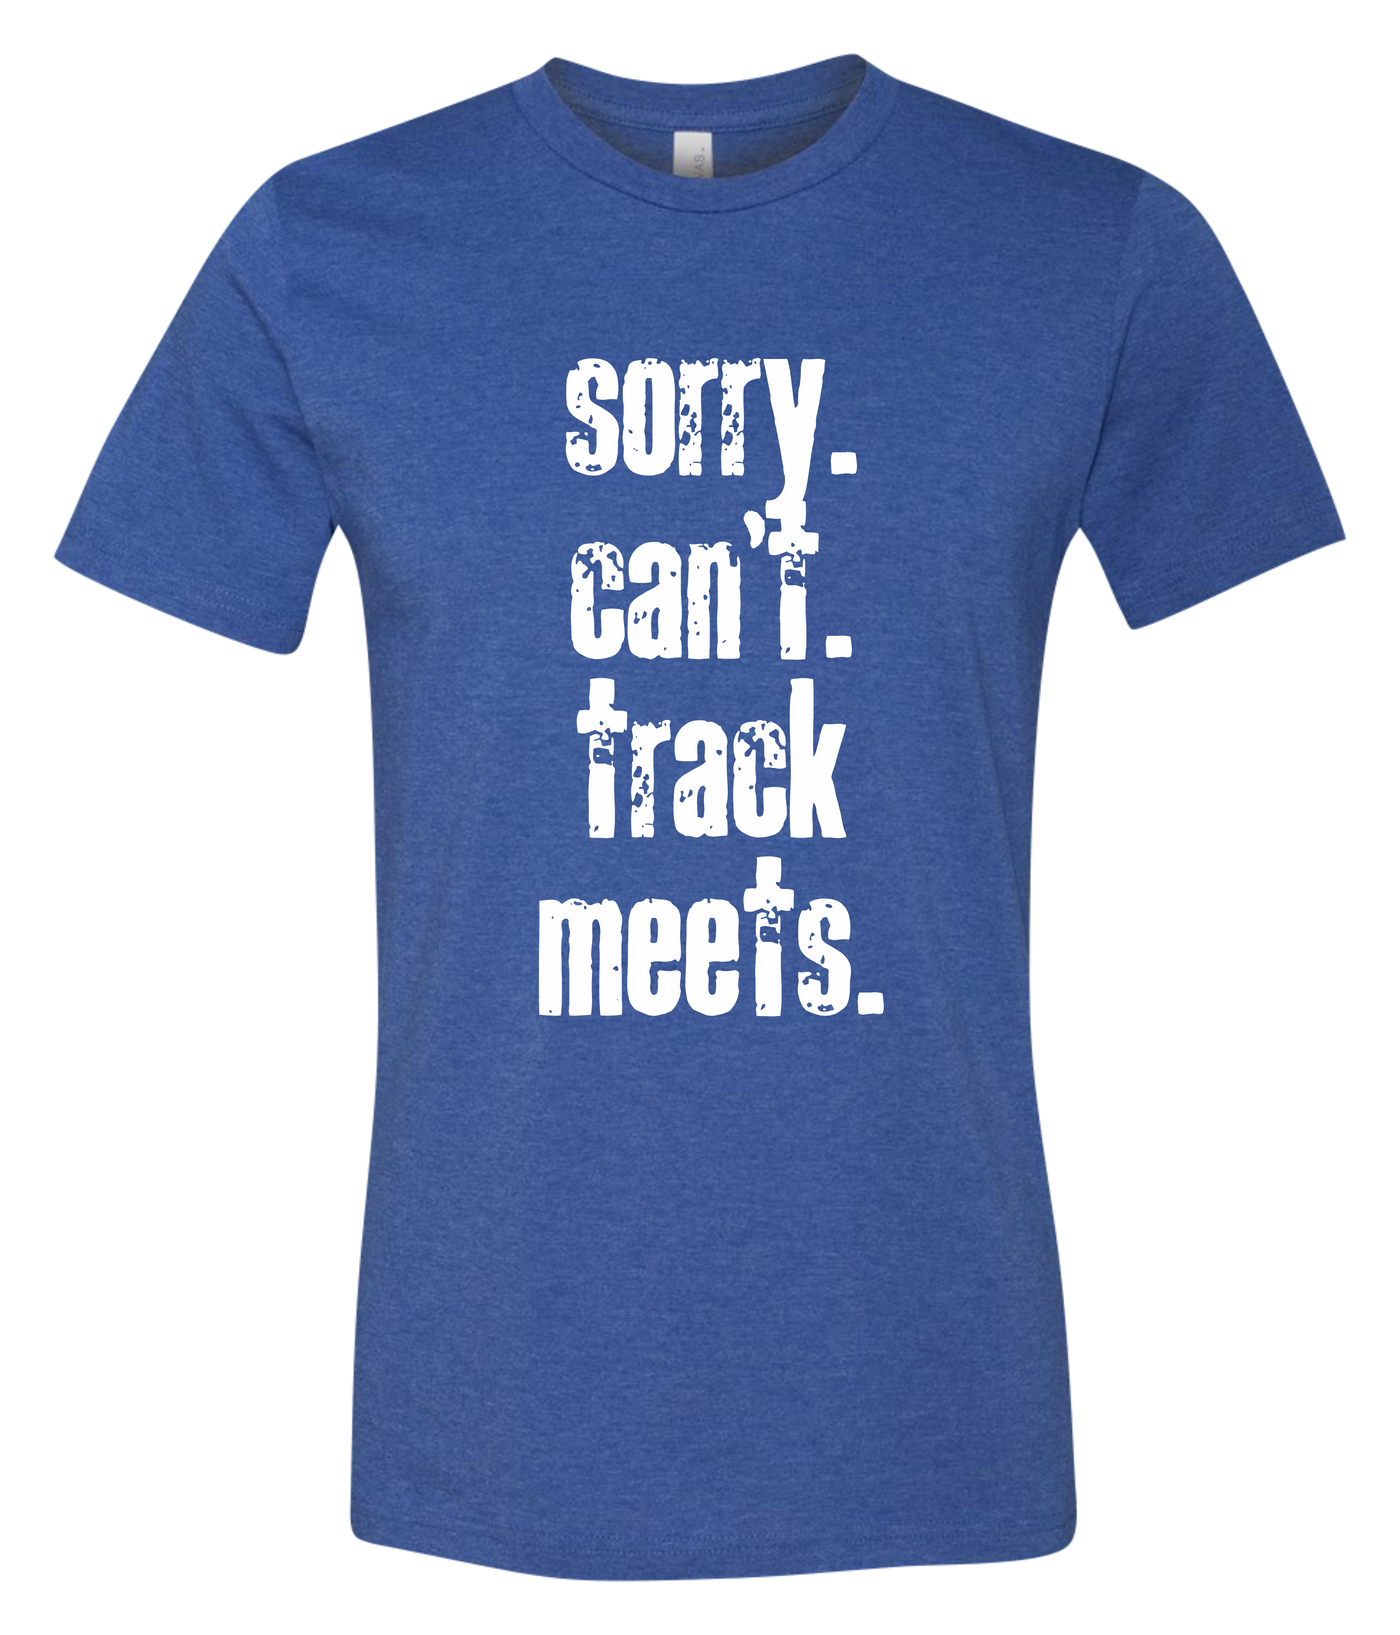 Sorry. Can't. Track Meets. Short Sleeve Graphic T-shirt